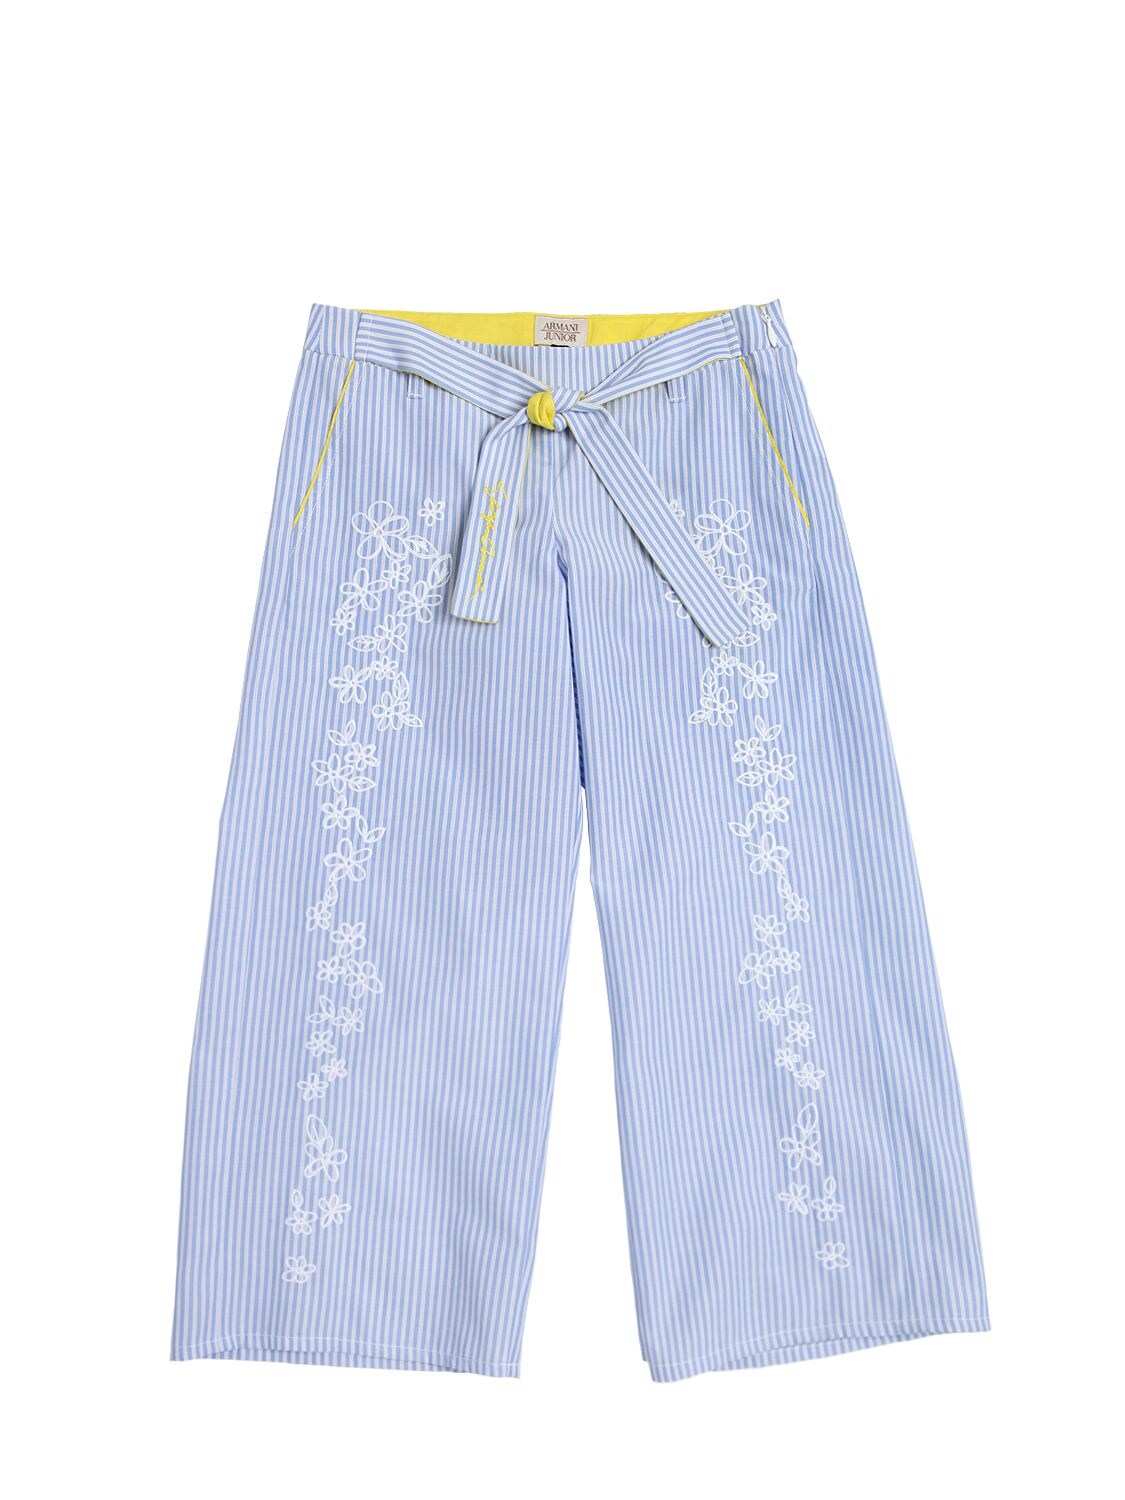 Armani Junior Kids' Embroidered Striped Cotton Oxford Pants In Blue,white